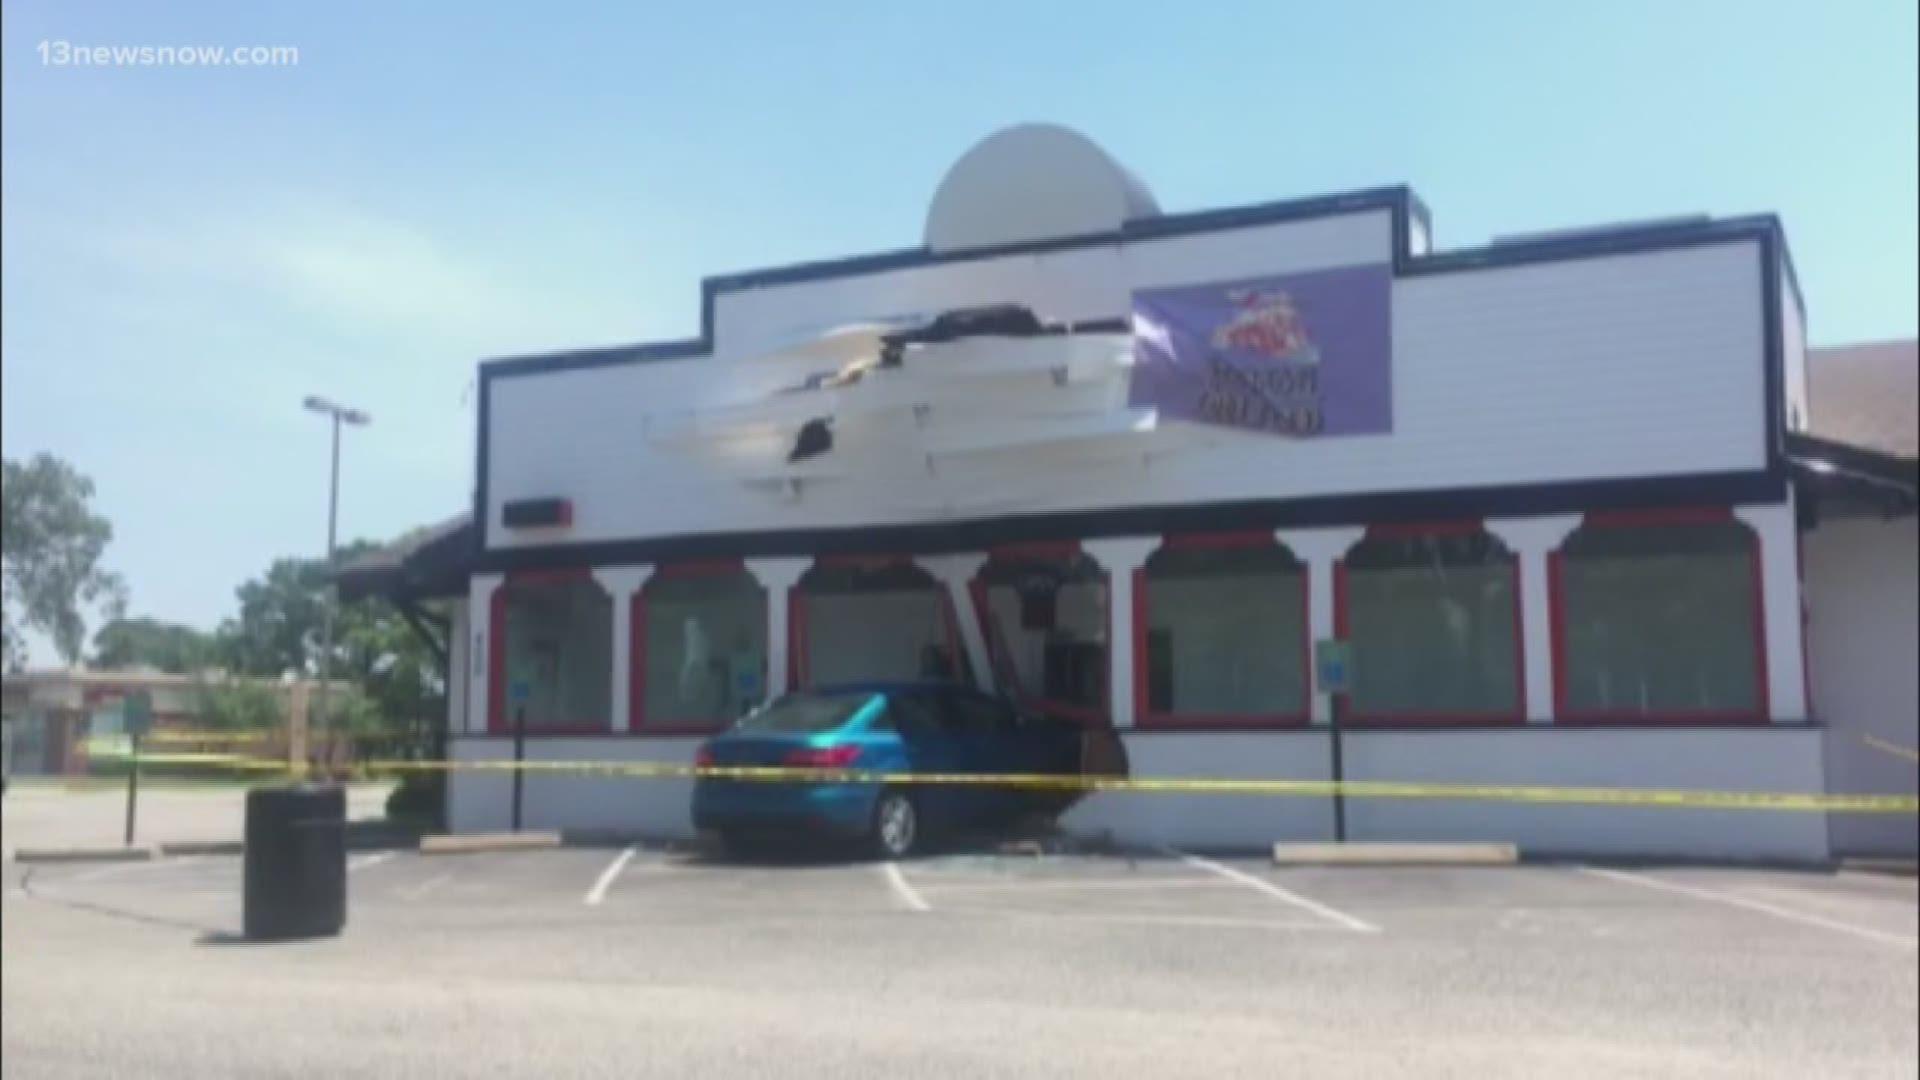 A-Mayes-N Soulfood will have a grand opening, several months after a car crashed into the front of the building.